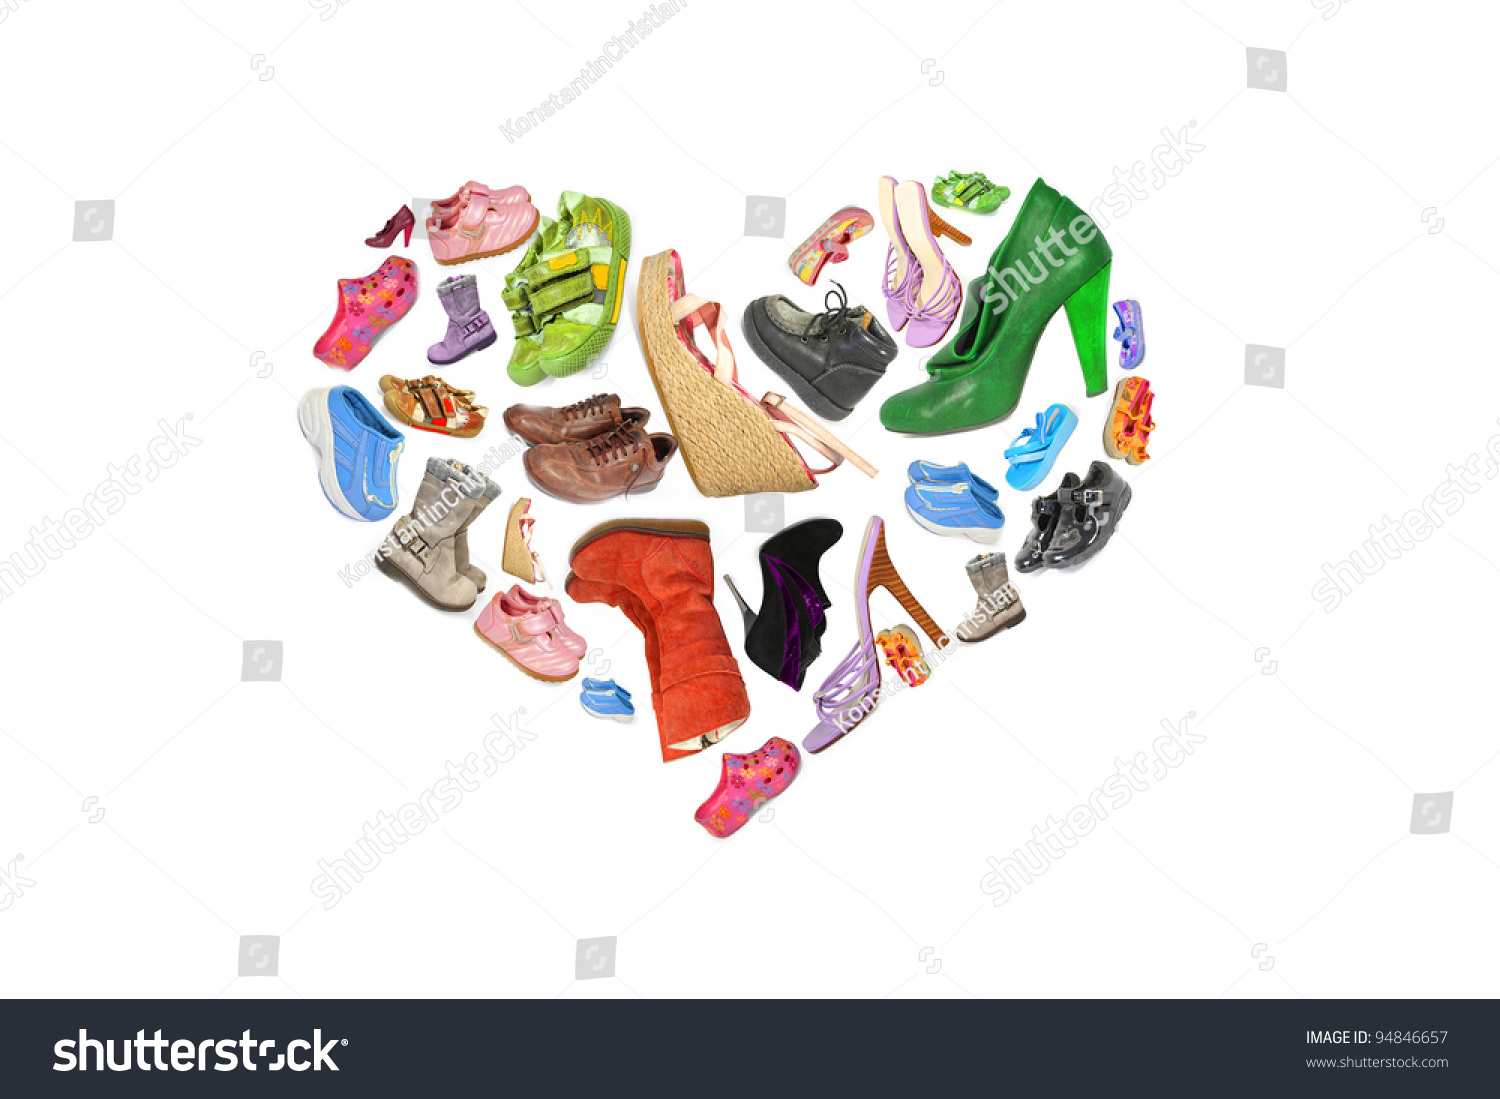 collection of different shoes in the form of heart #94846657